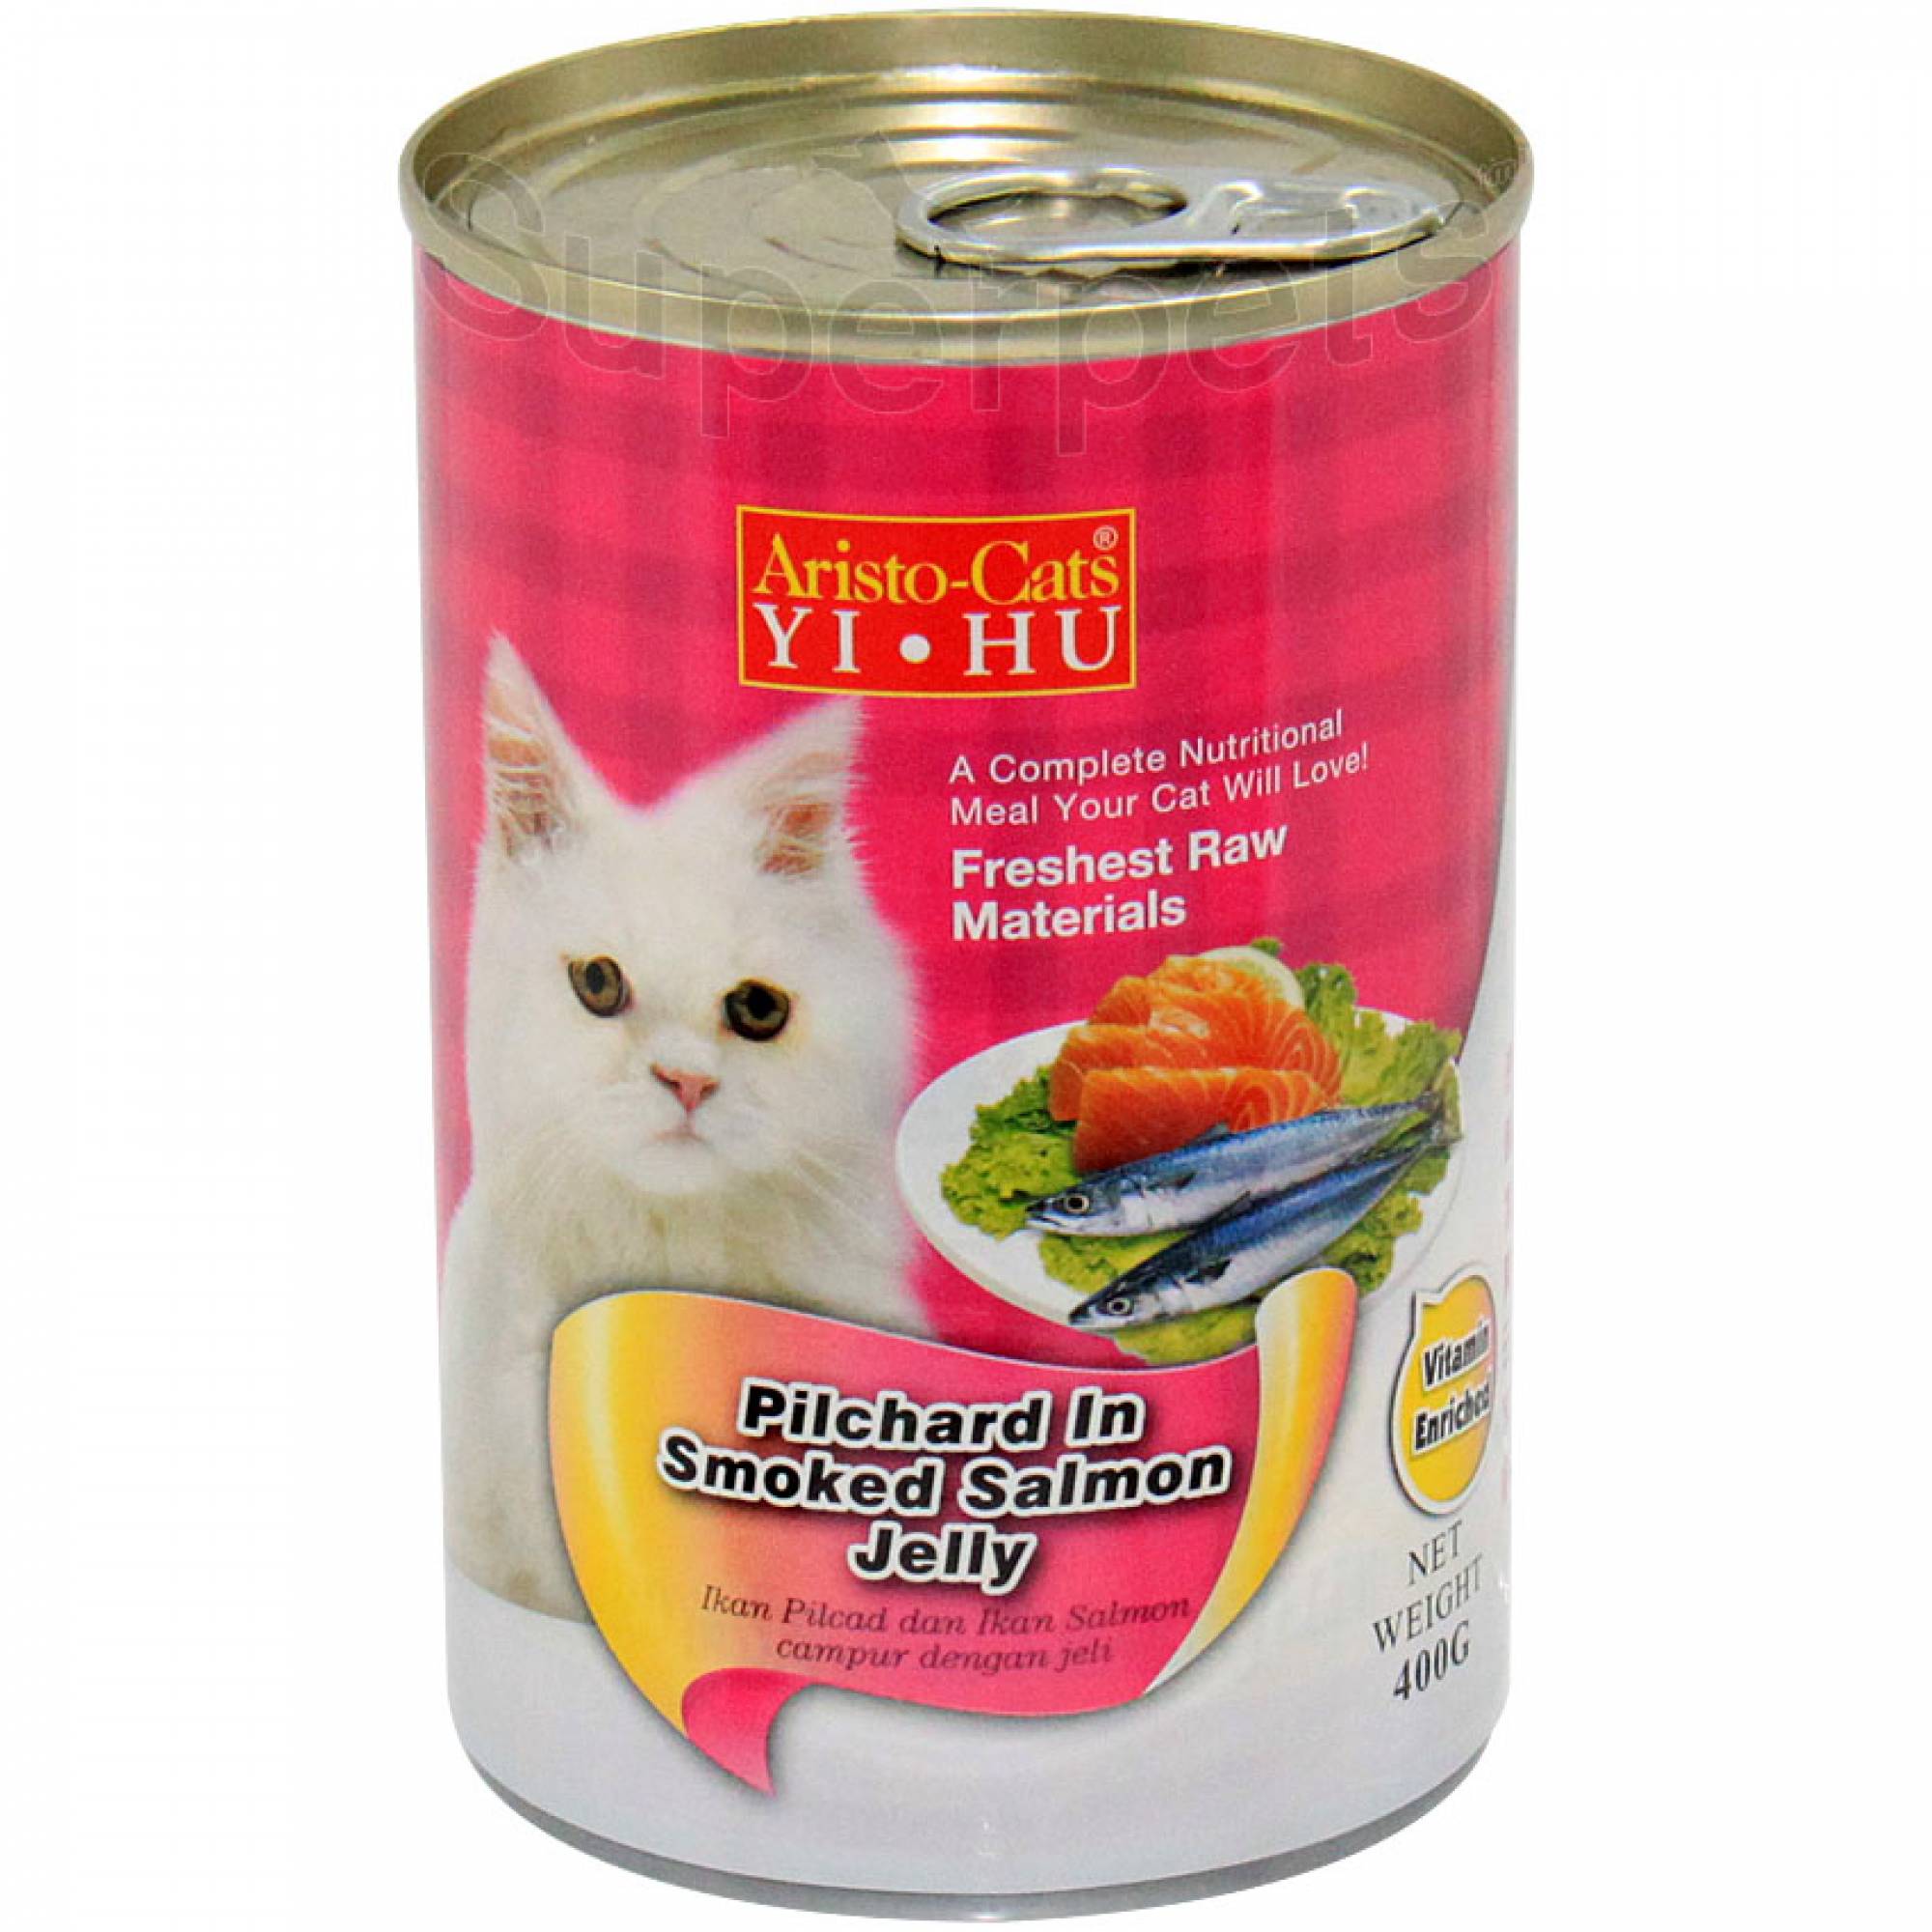 Aristo-Cats - Pilchard in Smoked Salmon Jelly 400g